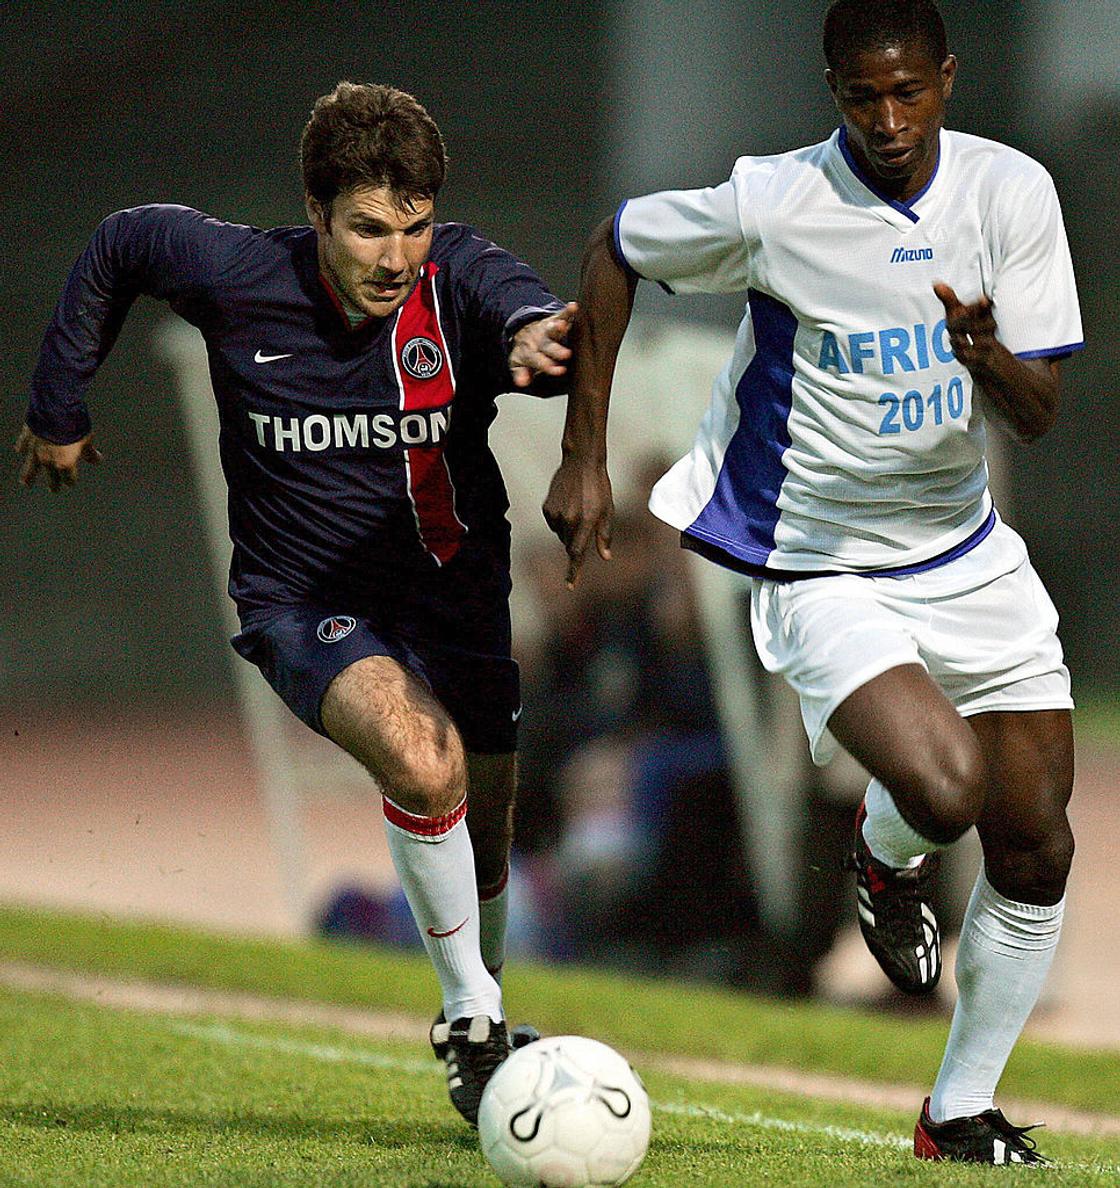 Jean-Marc Pilorget vying for the ball against Malian Kaloka